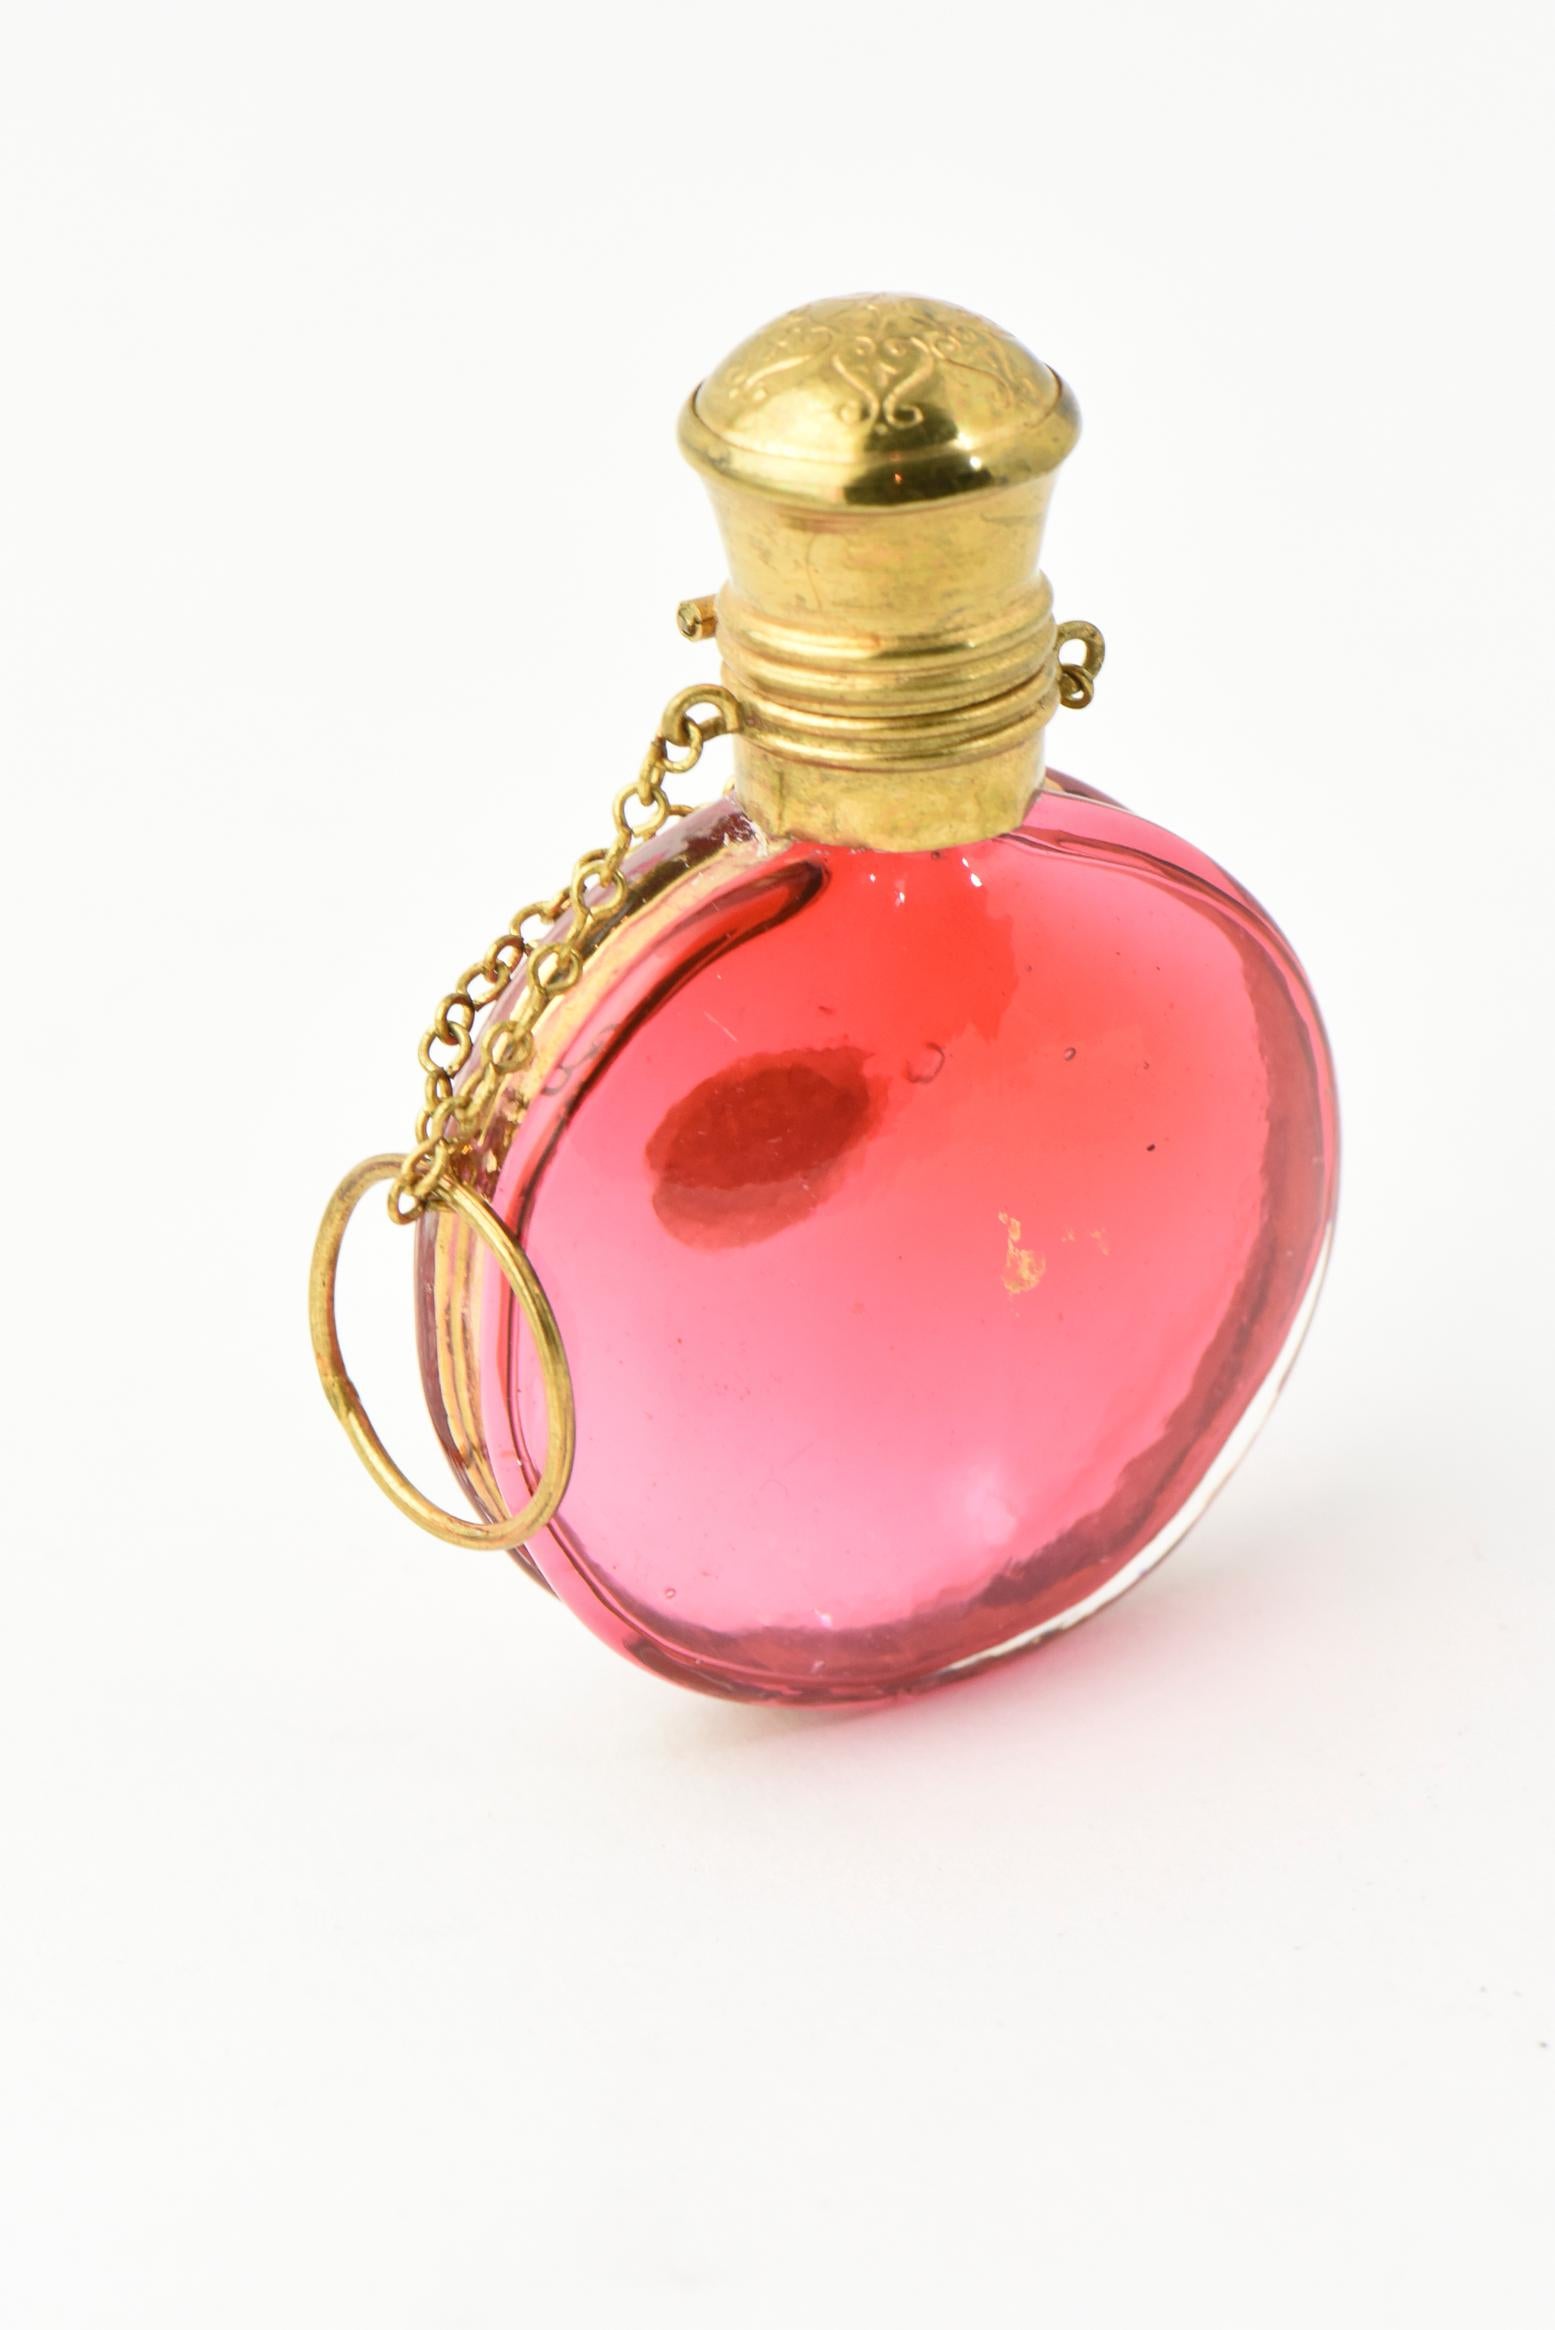 19th century Czech cranberry glass perfume bottle with glass stopper, hinged gilt lid and 4